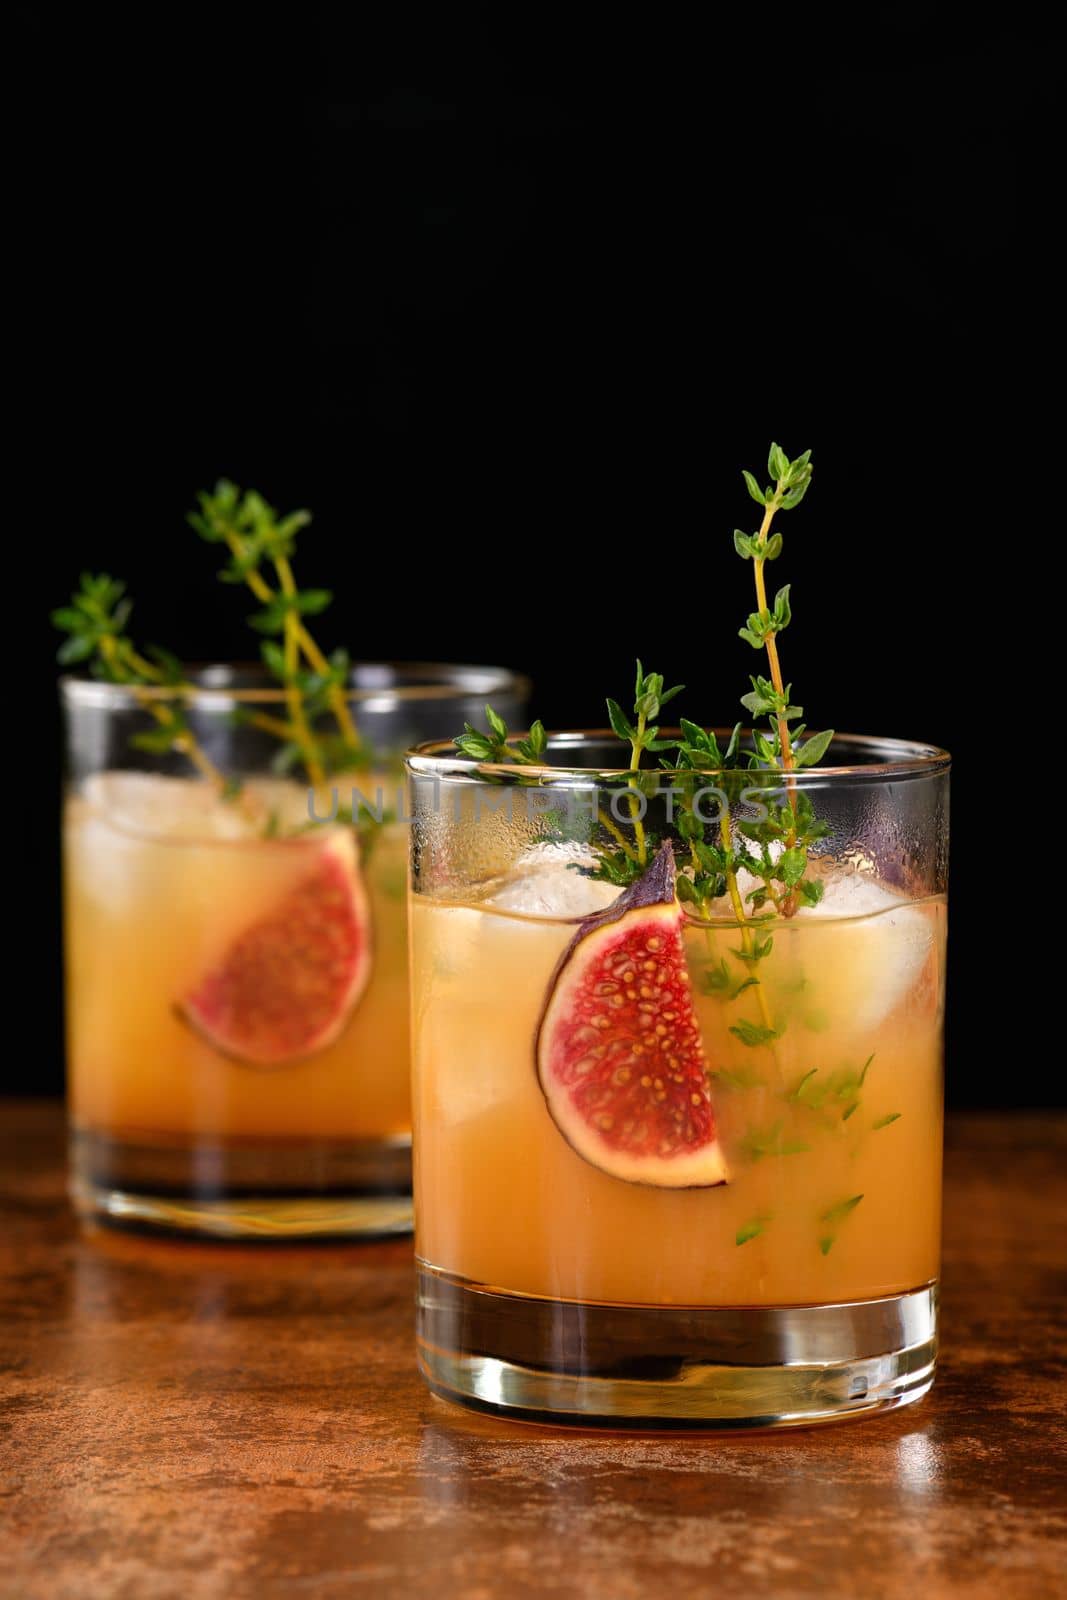 Bourbon Sour cocktail with fig spices, lemon juice and syrup. Easy to make but so delicious. Garnish with figs and thyme.